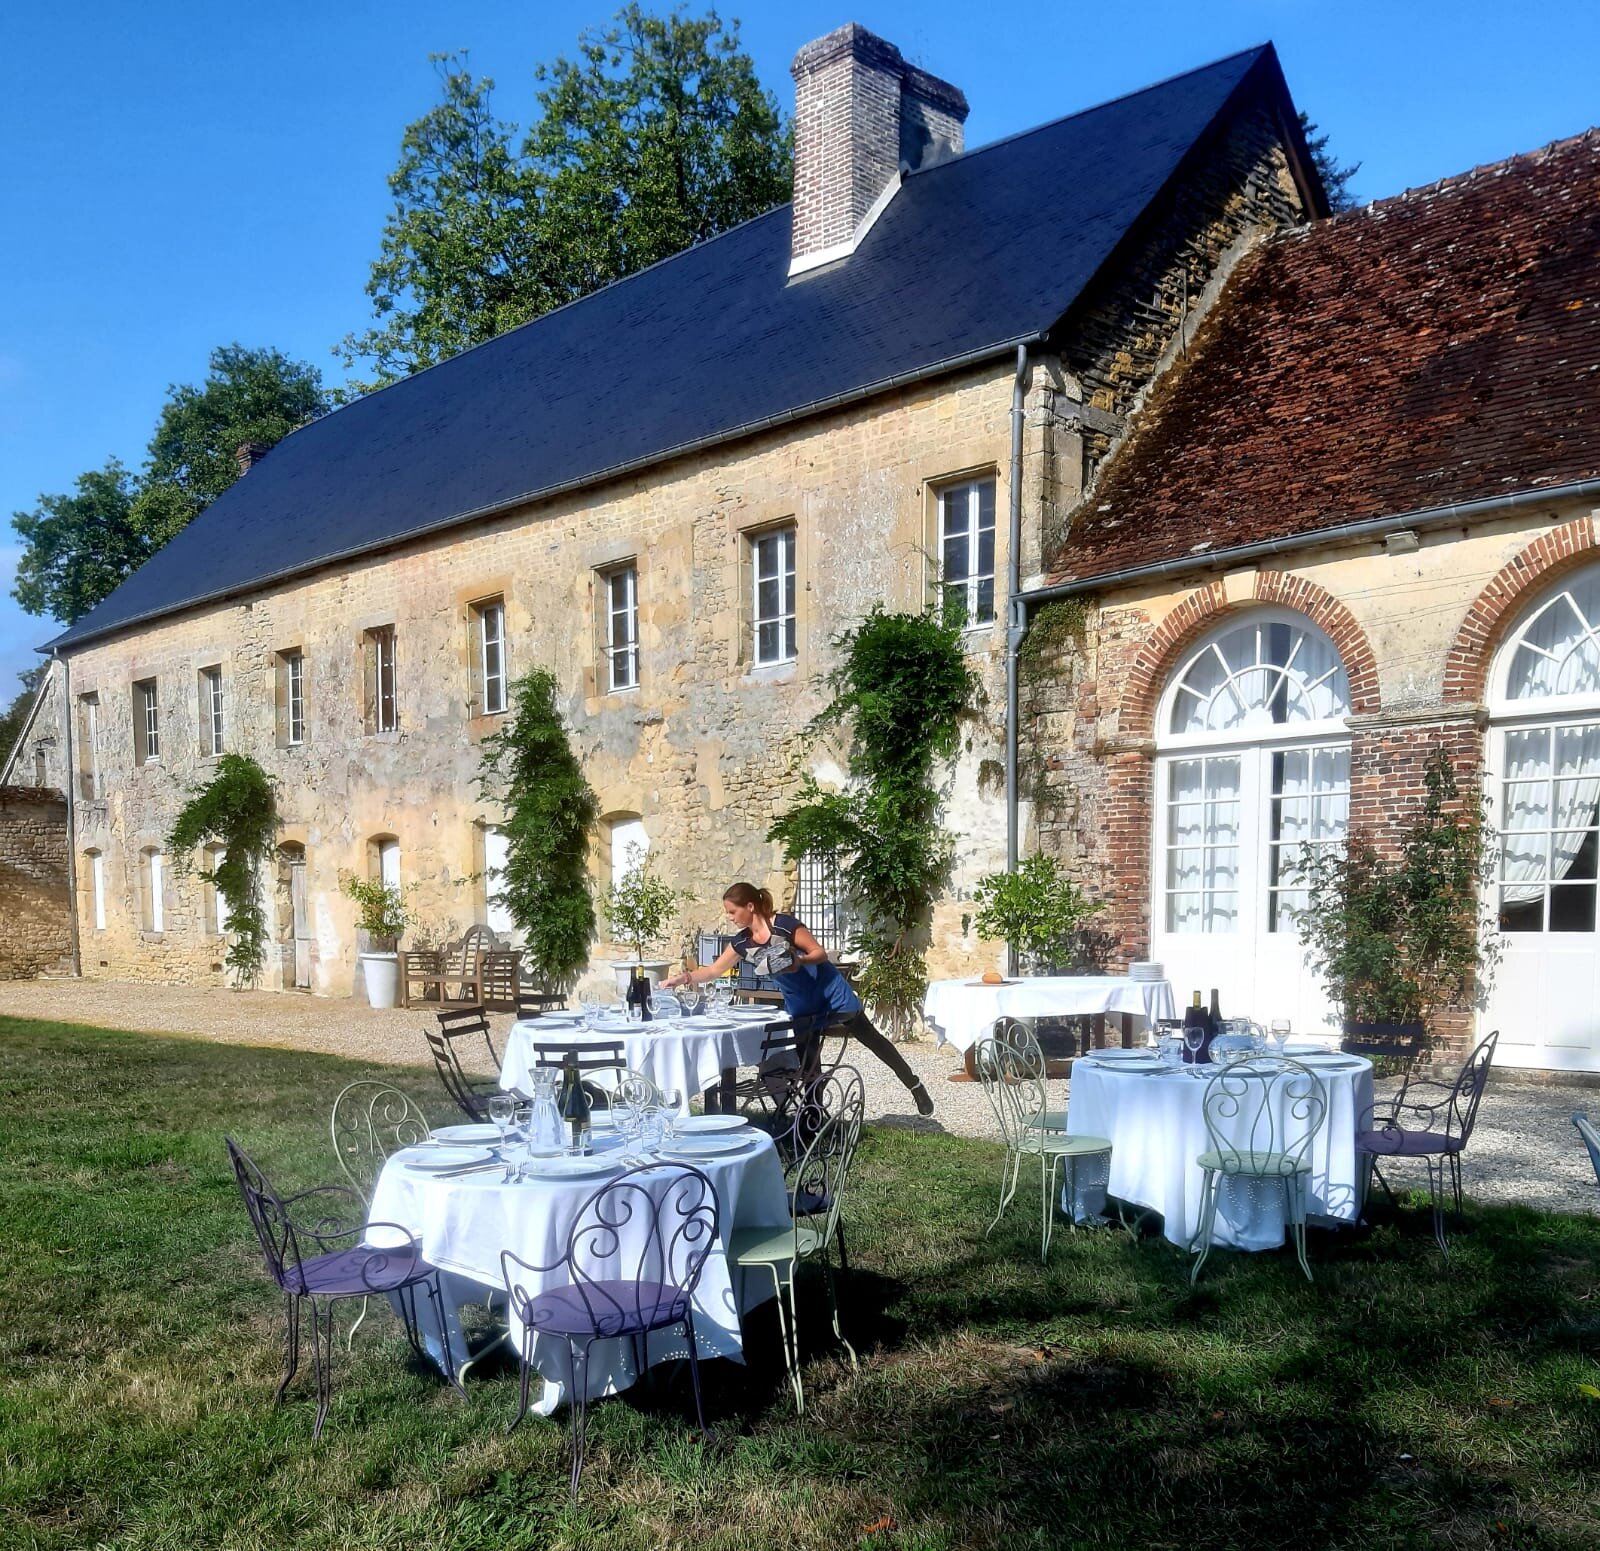 The Orangerie, a pretty brick building with tables and chairs outside, a perfect venue for retreats and functions in France.